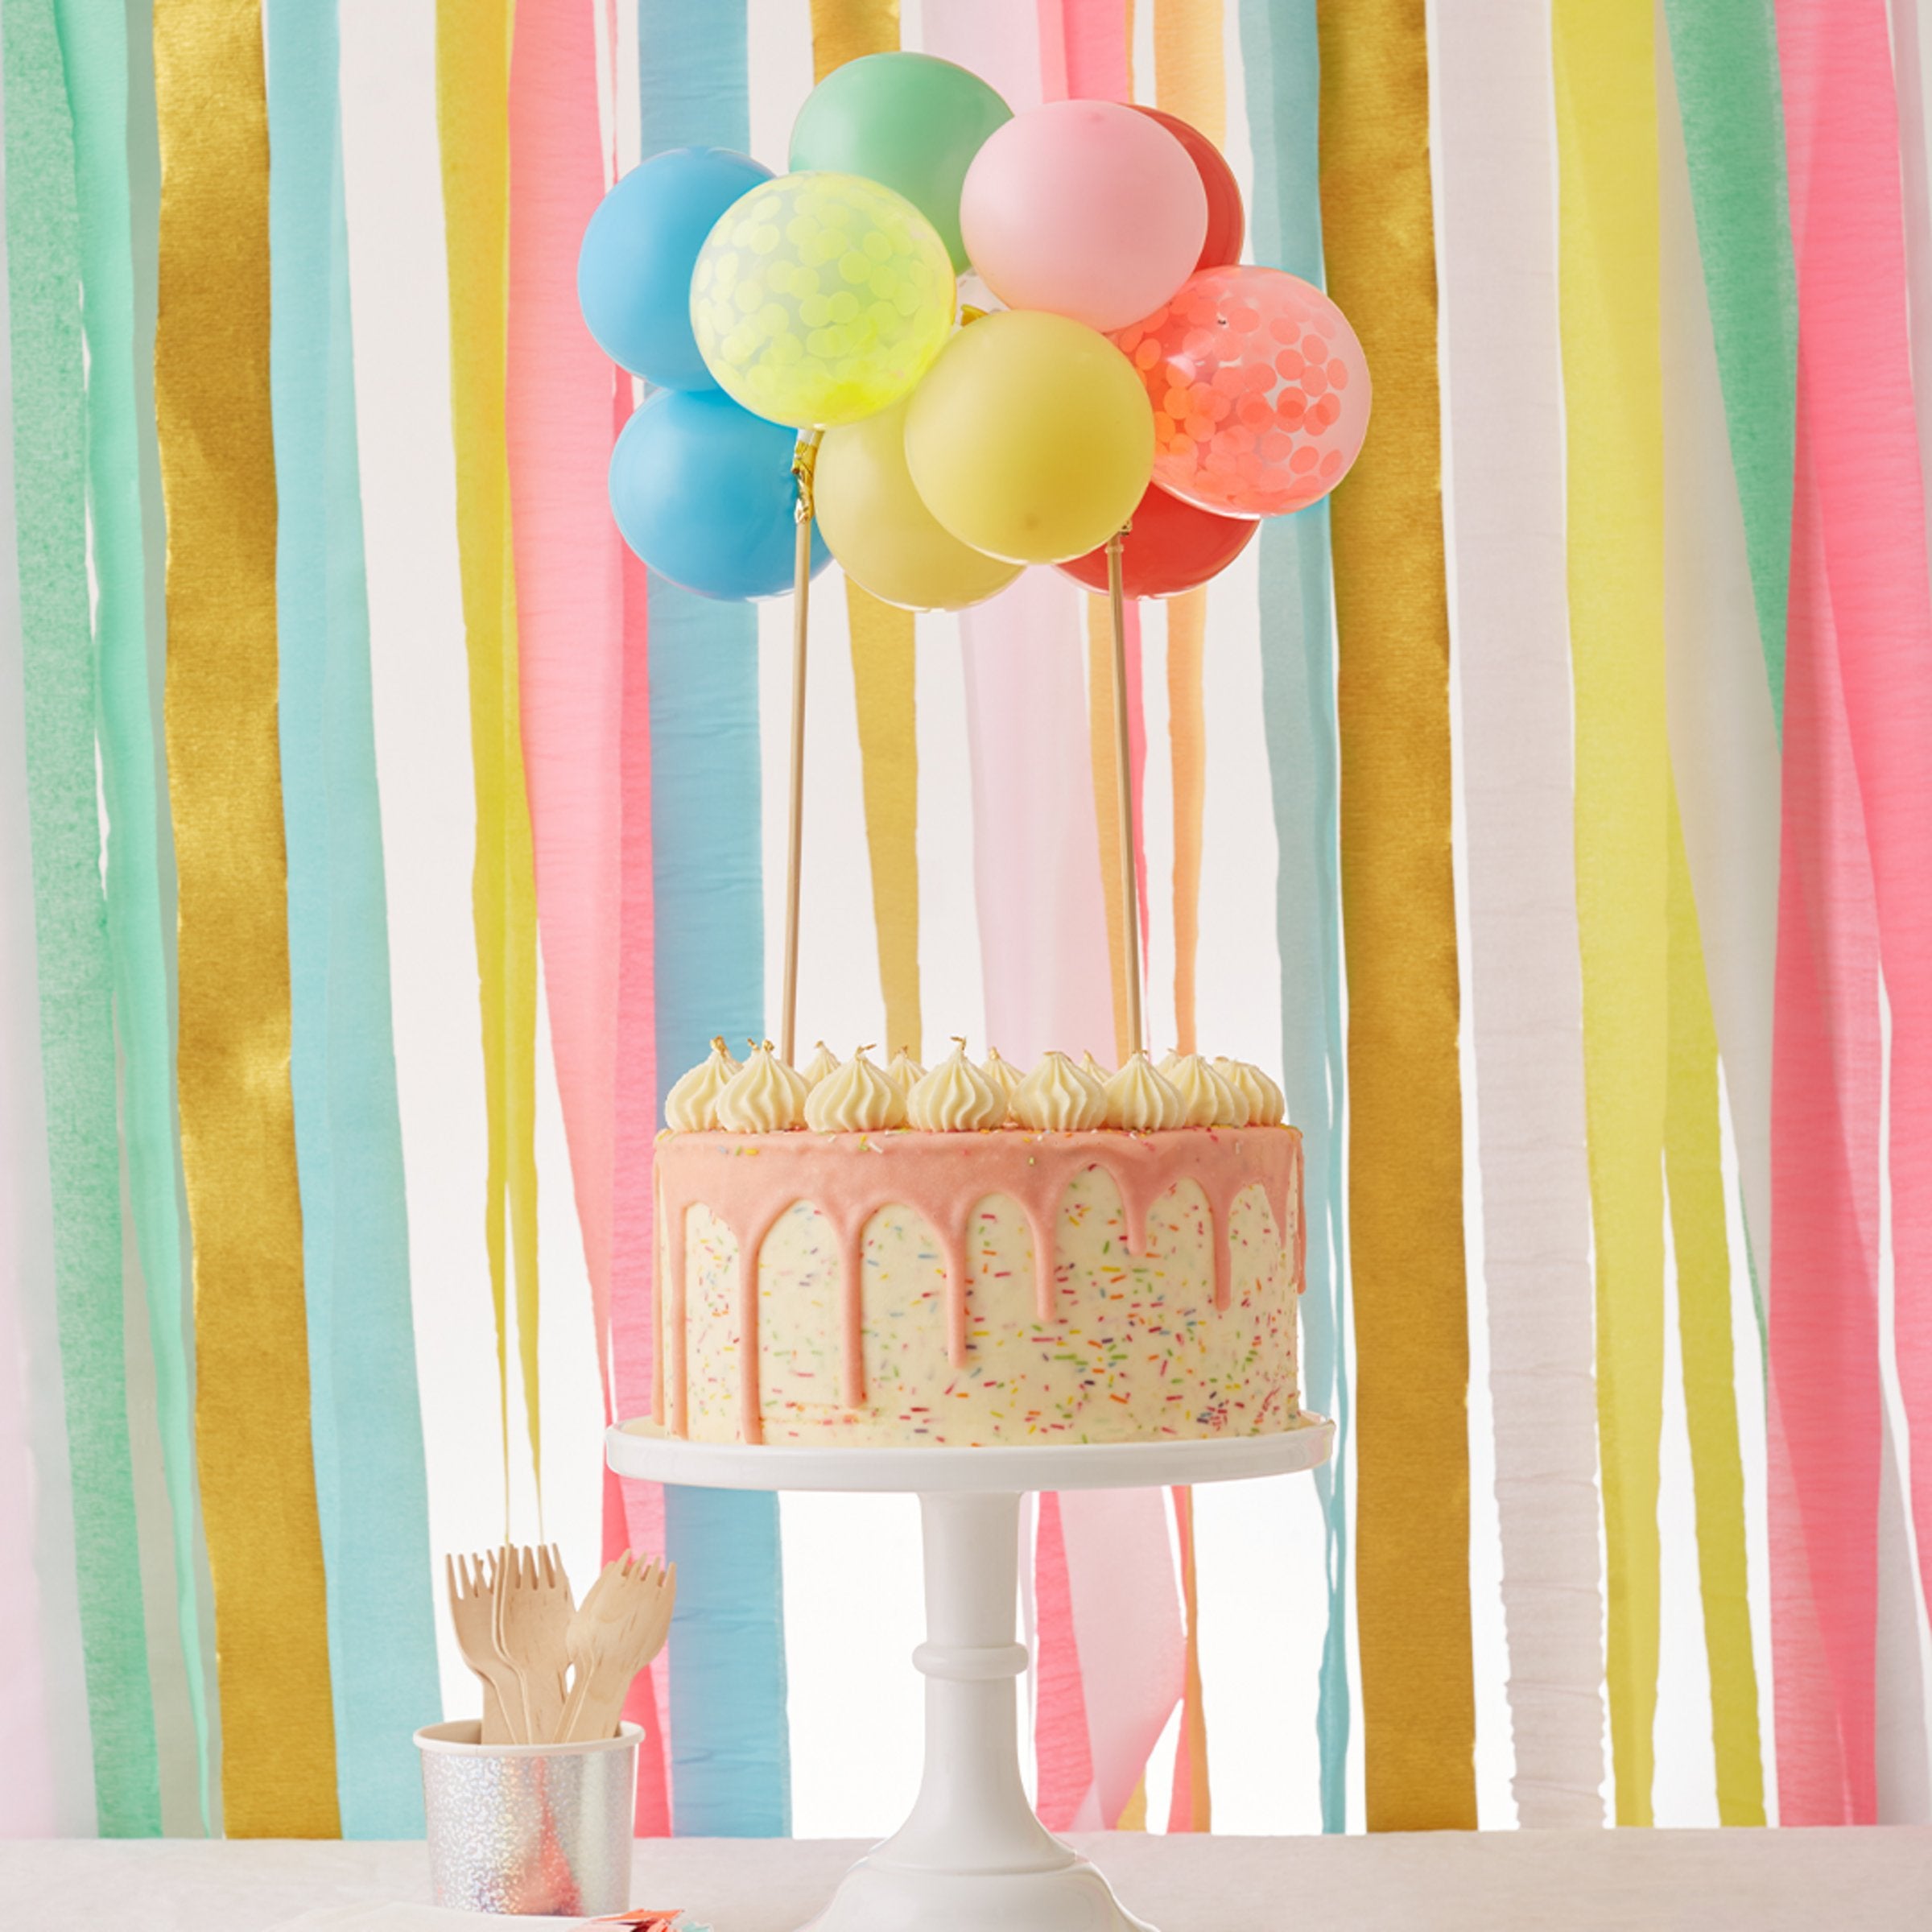 Premium Photo | Blue and white birthday cake with balloons in the  background. photo set decoration for photo shoot.